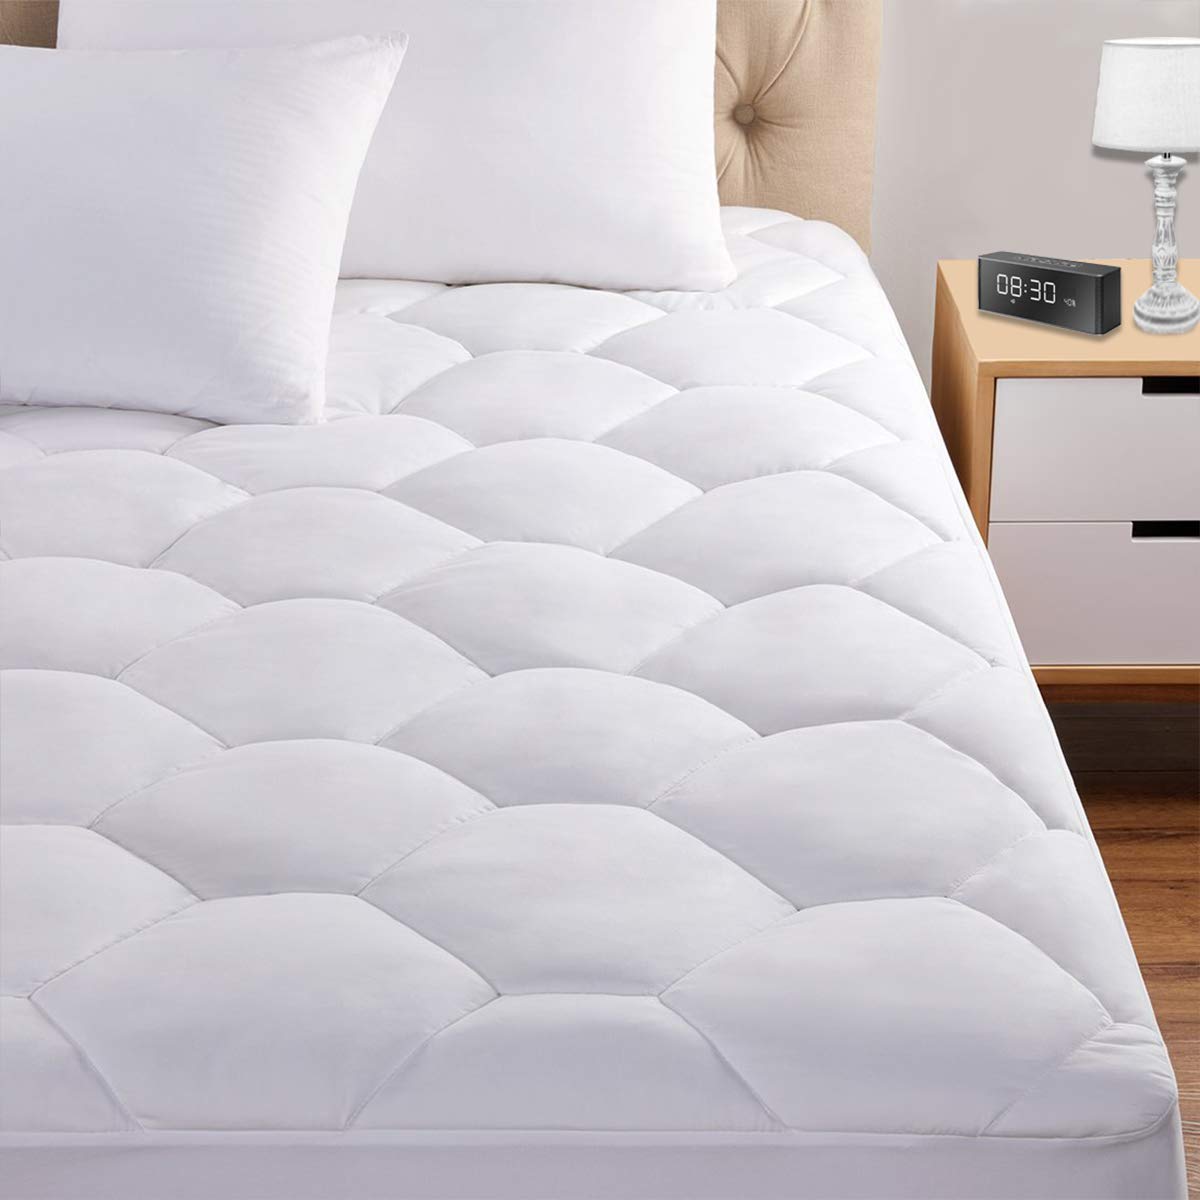 FAVORLAND King Mattress Pad, 8-21 Deep Pocket Protector Ultra Soft Quilted  Fitted Topper cover Fit for Dorm Home Hotel -White